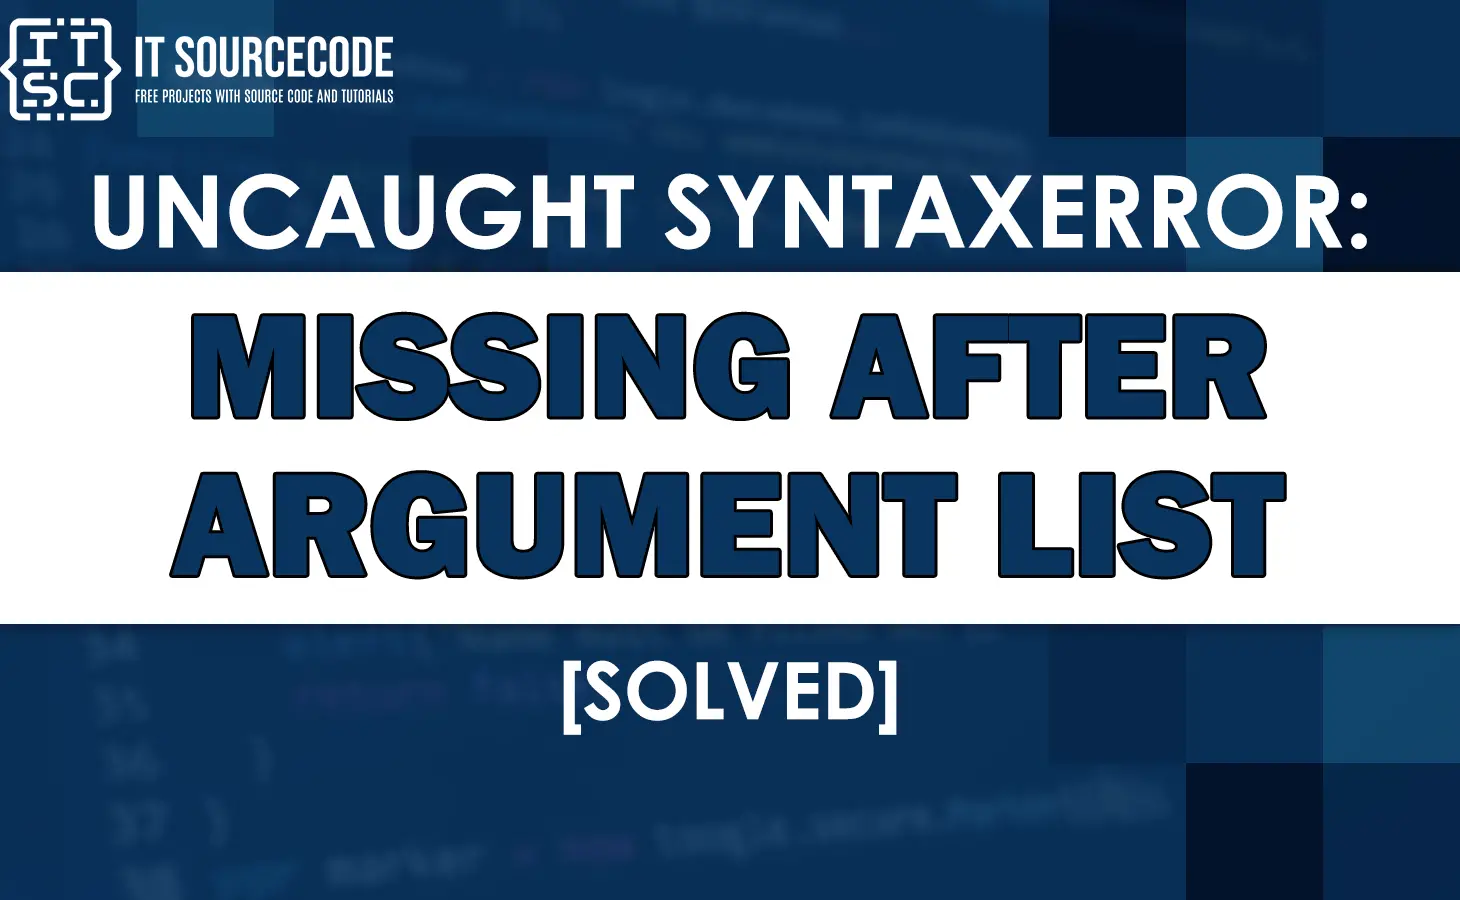 Uncaught syntaxerror missing after argument list